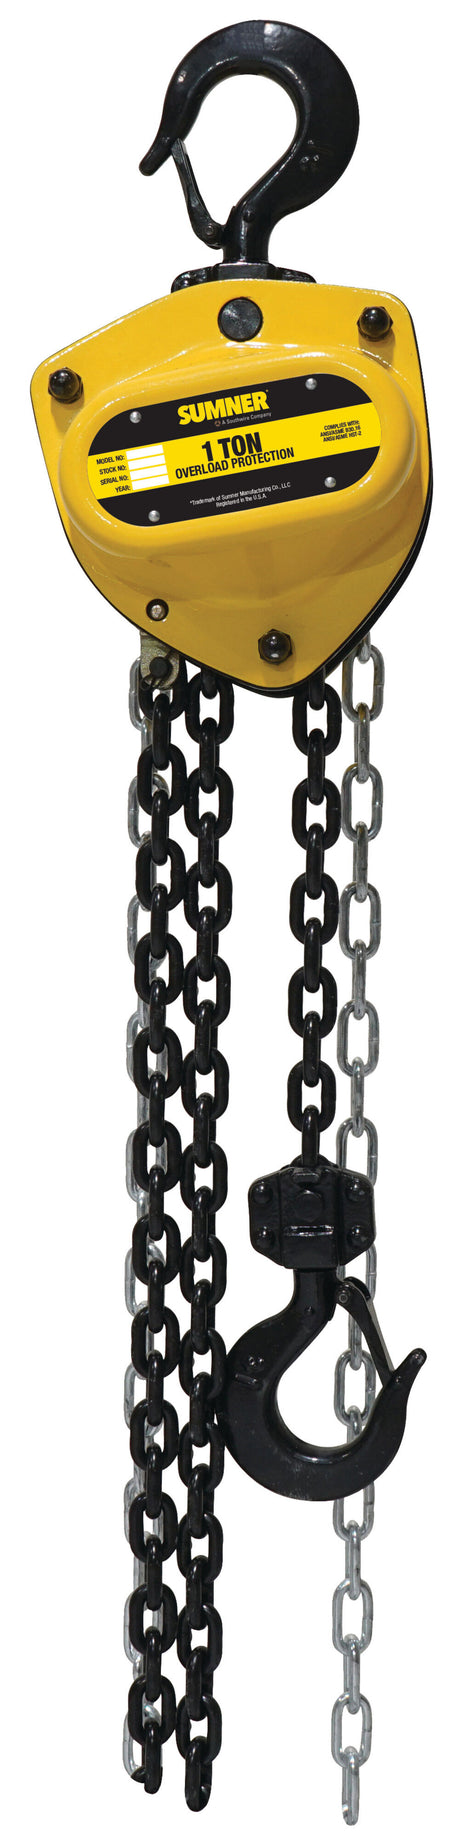 Chain Hoist 1 Ton with 20' Chain Fall and Overload Protection 787450